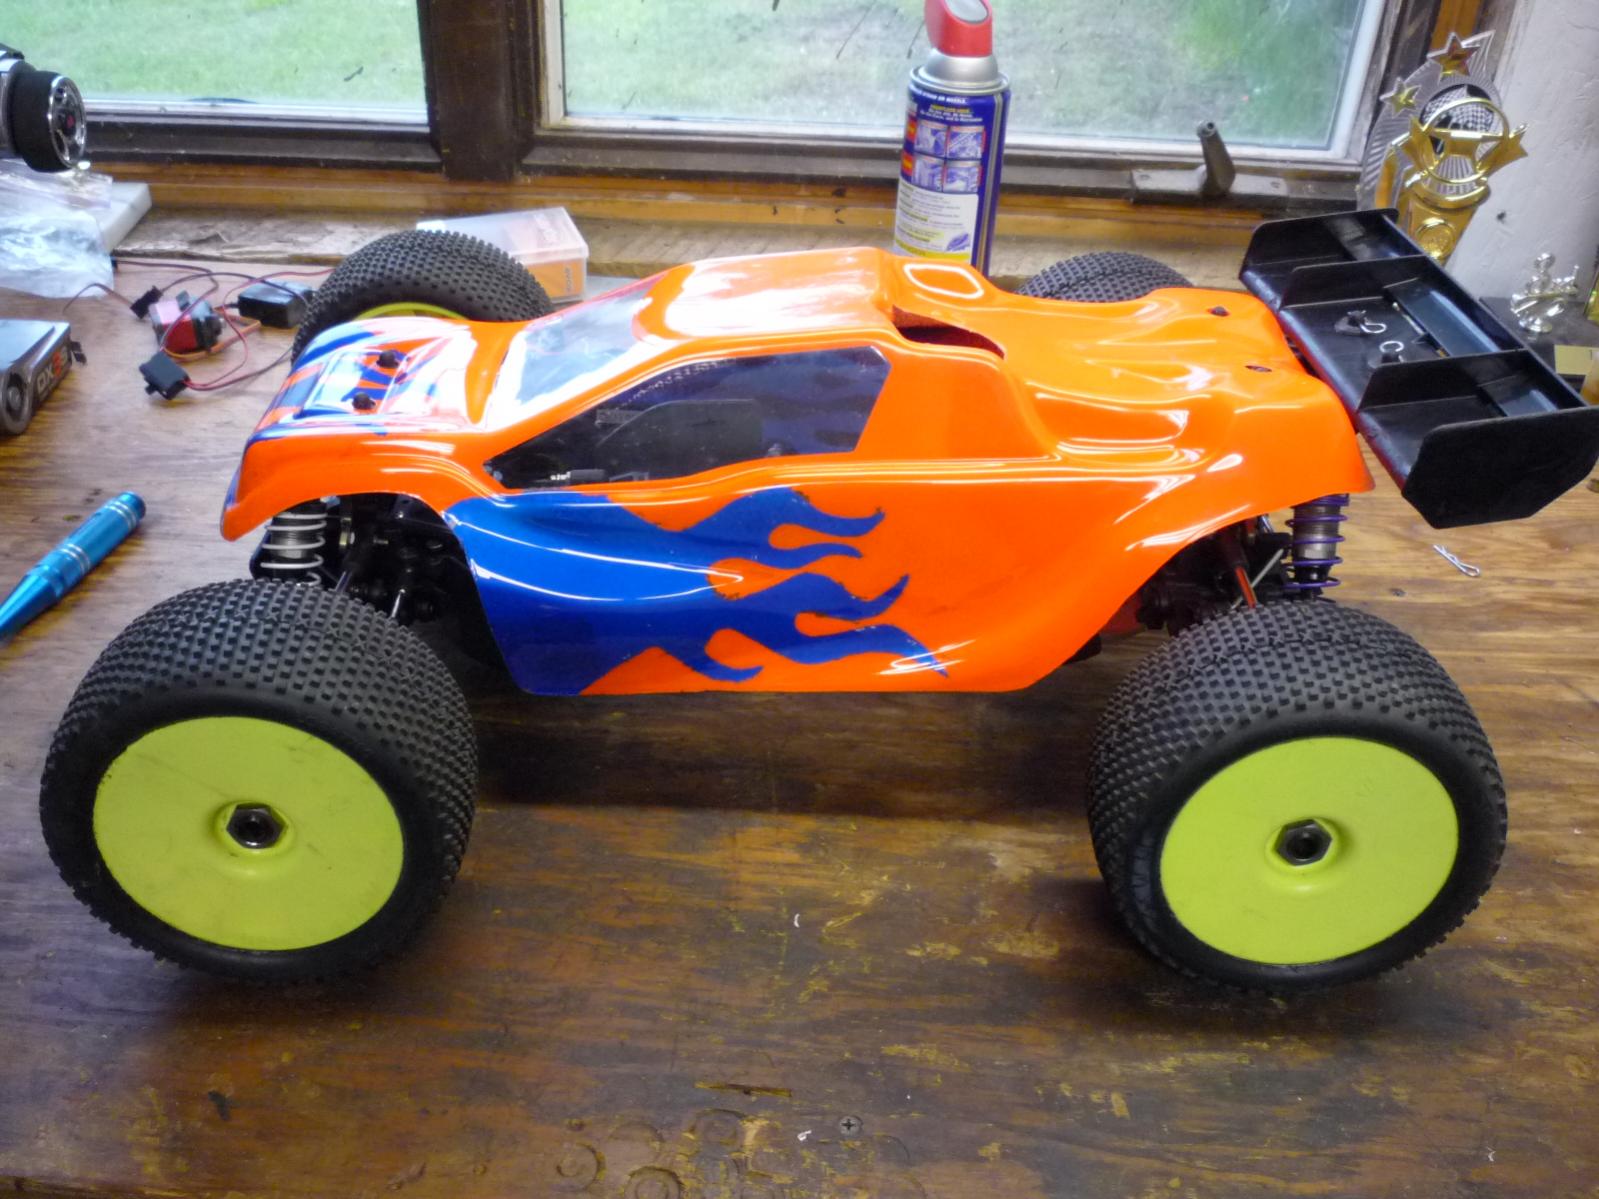 f/s Losi 8ight t 1.0 truggy with starter box and servo's - R/C 